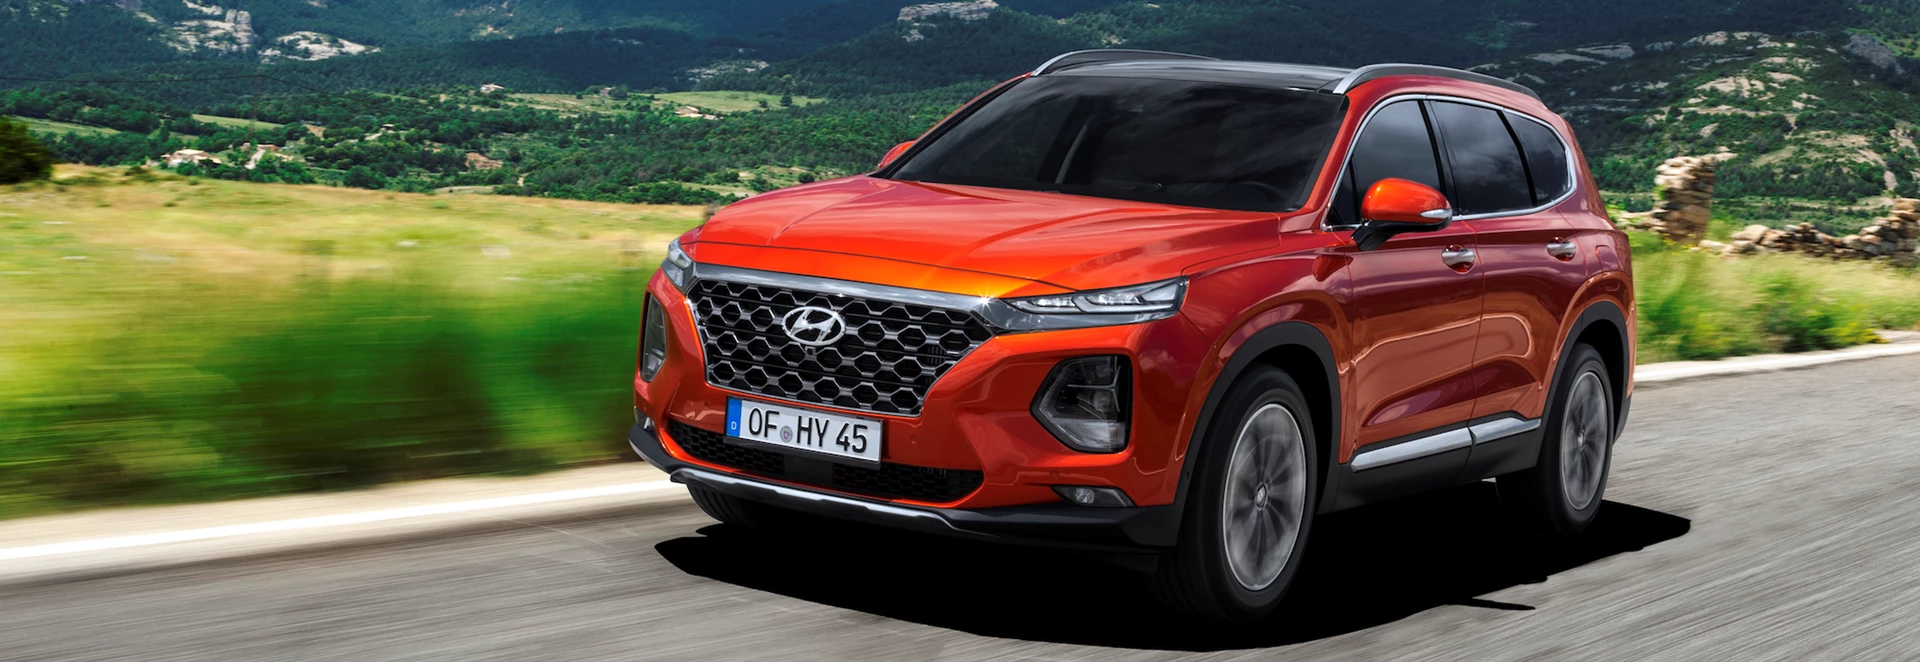 2018 Hyundai Santa Fe pricing and specification announced